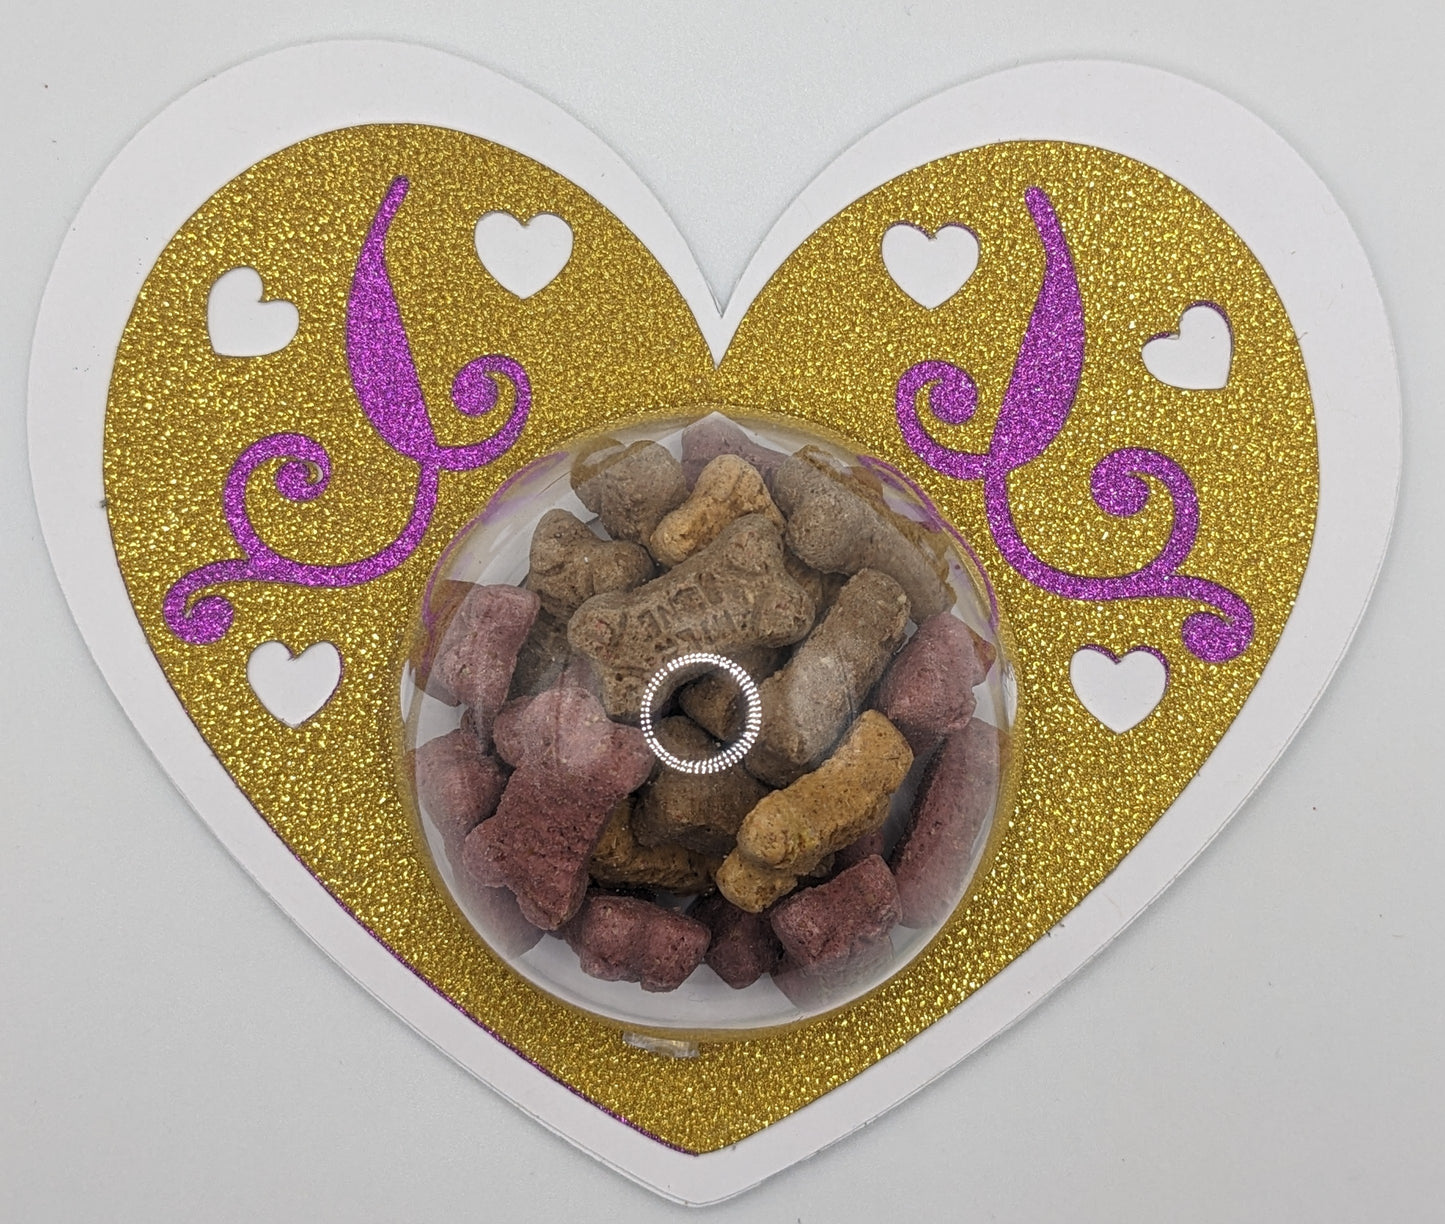 Refillable Gitter Heart Dome with Dog Treats